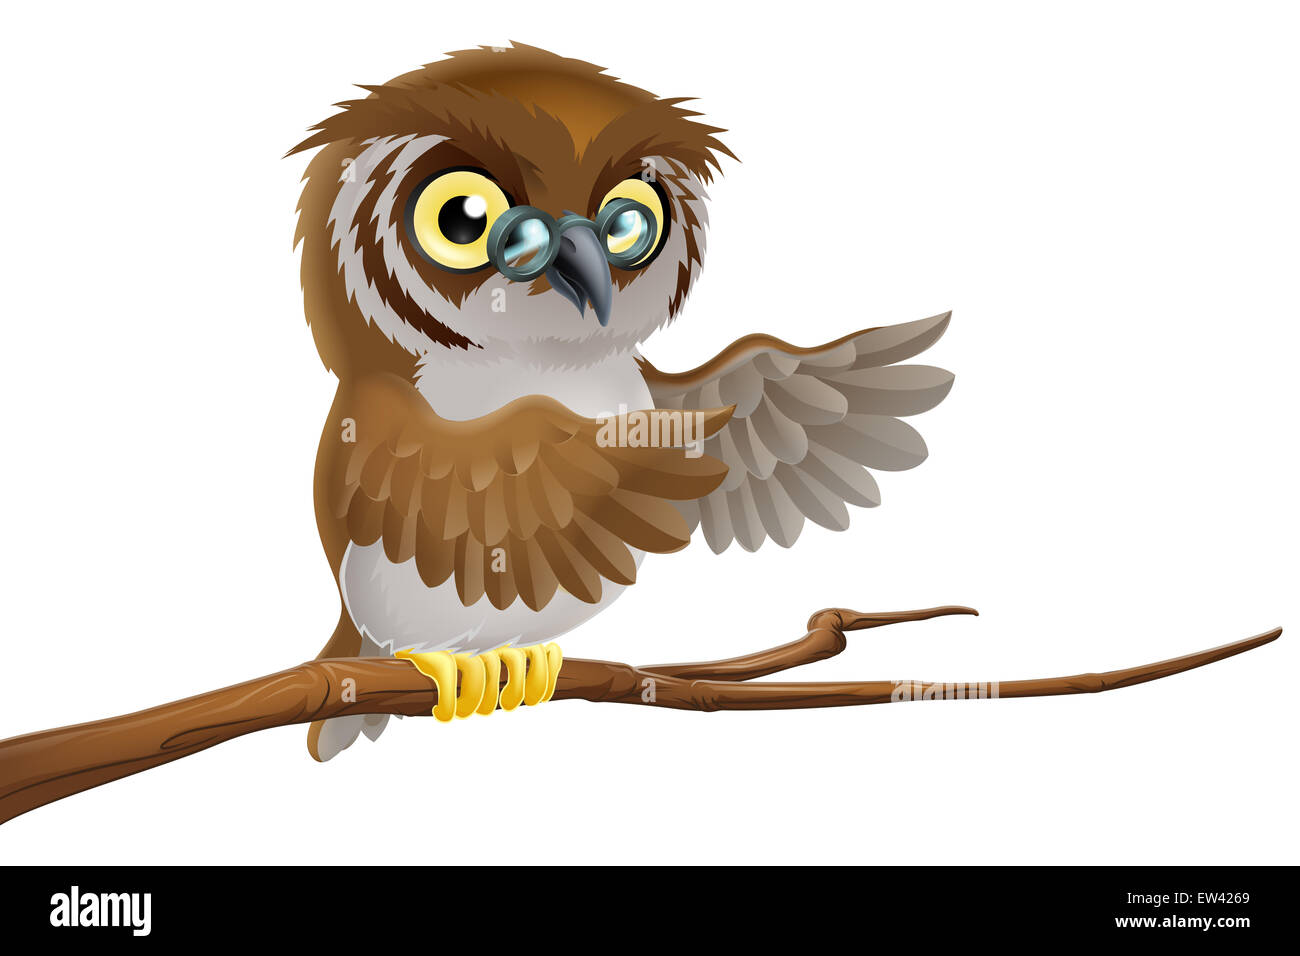 An illustration of a cartoon owl wearing glasses Stock Photo